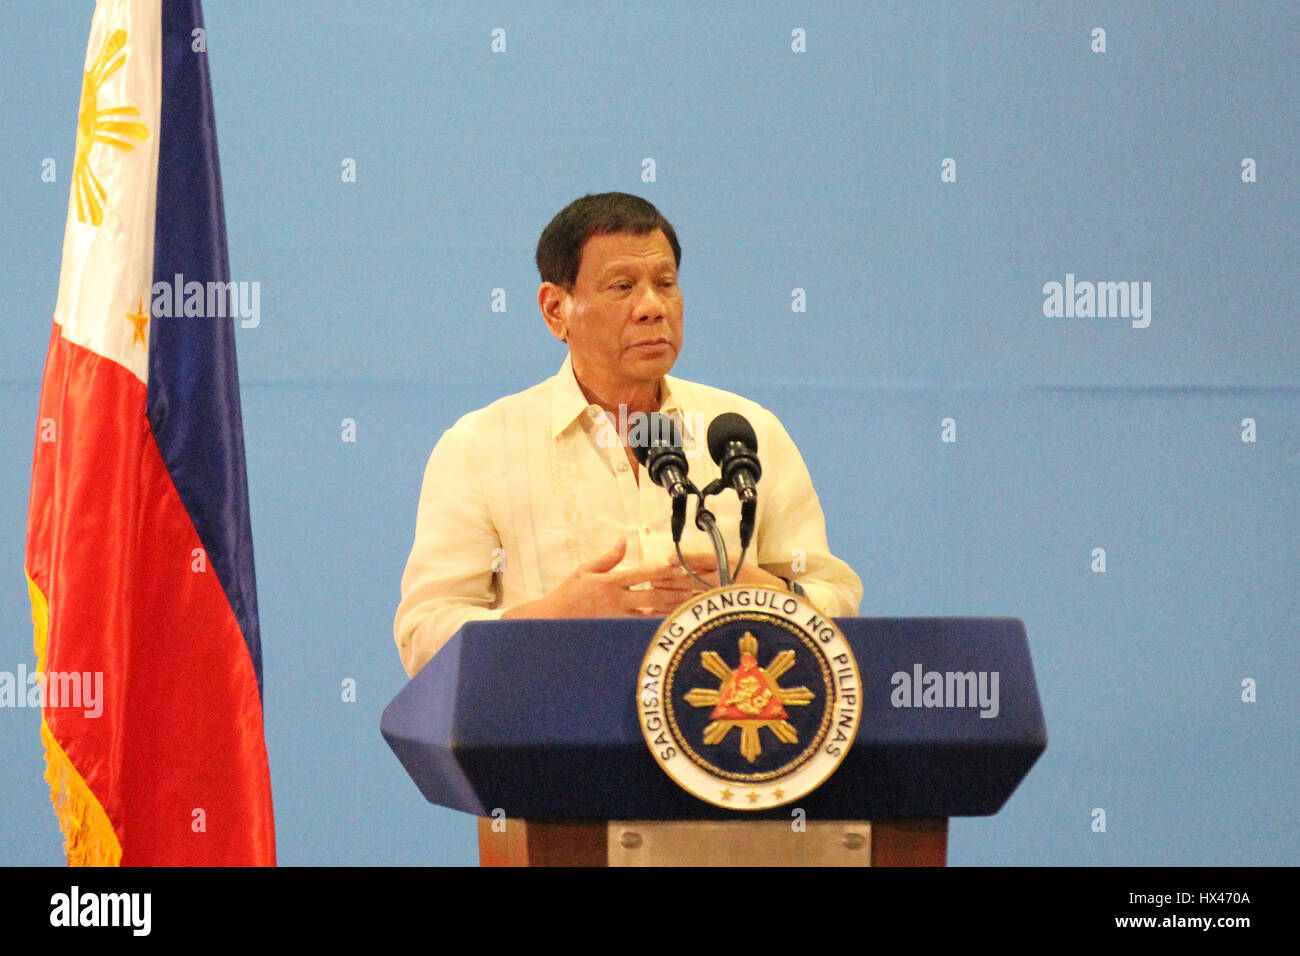 Manila, Philippines. 24th Mar, 2017. Philippine President Rodrigo Duterte speaks at a meeting of the Federation of Filipino-Chinese Chambers of Commerce and Industry (FFCCCII) in Manila, the Philippines, March 24, 2017. Philippine President Rodrigo Duterte said Friday that he is looking forward to his second trip to China this May to attend the 'One Belt, One Road' summit organized by the Chinese government. Credit: Wang Yu/Xinhua/Alamy Live News Stock Photo